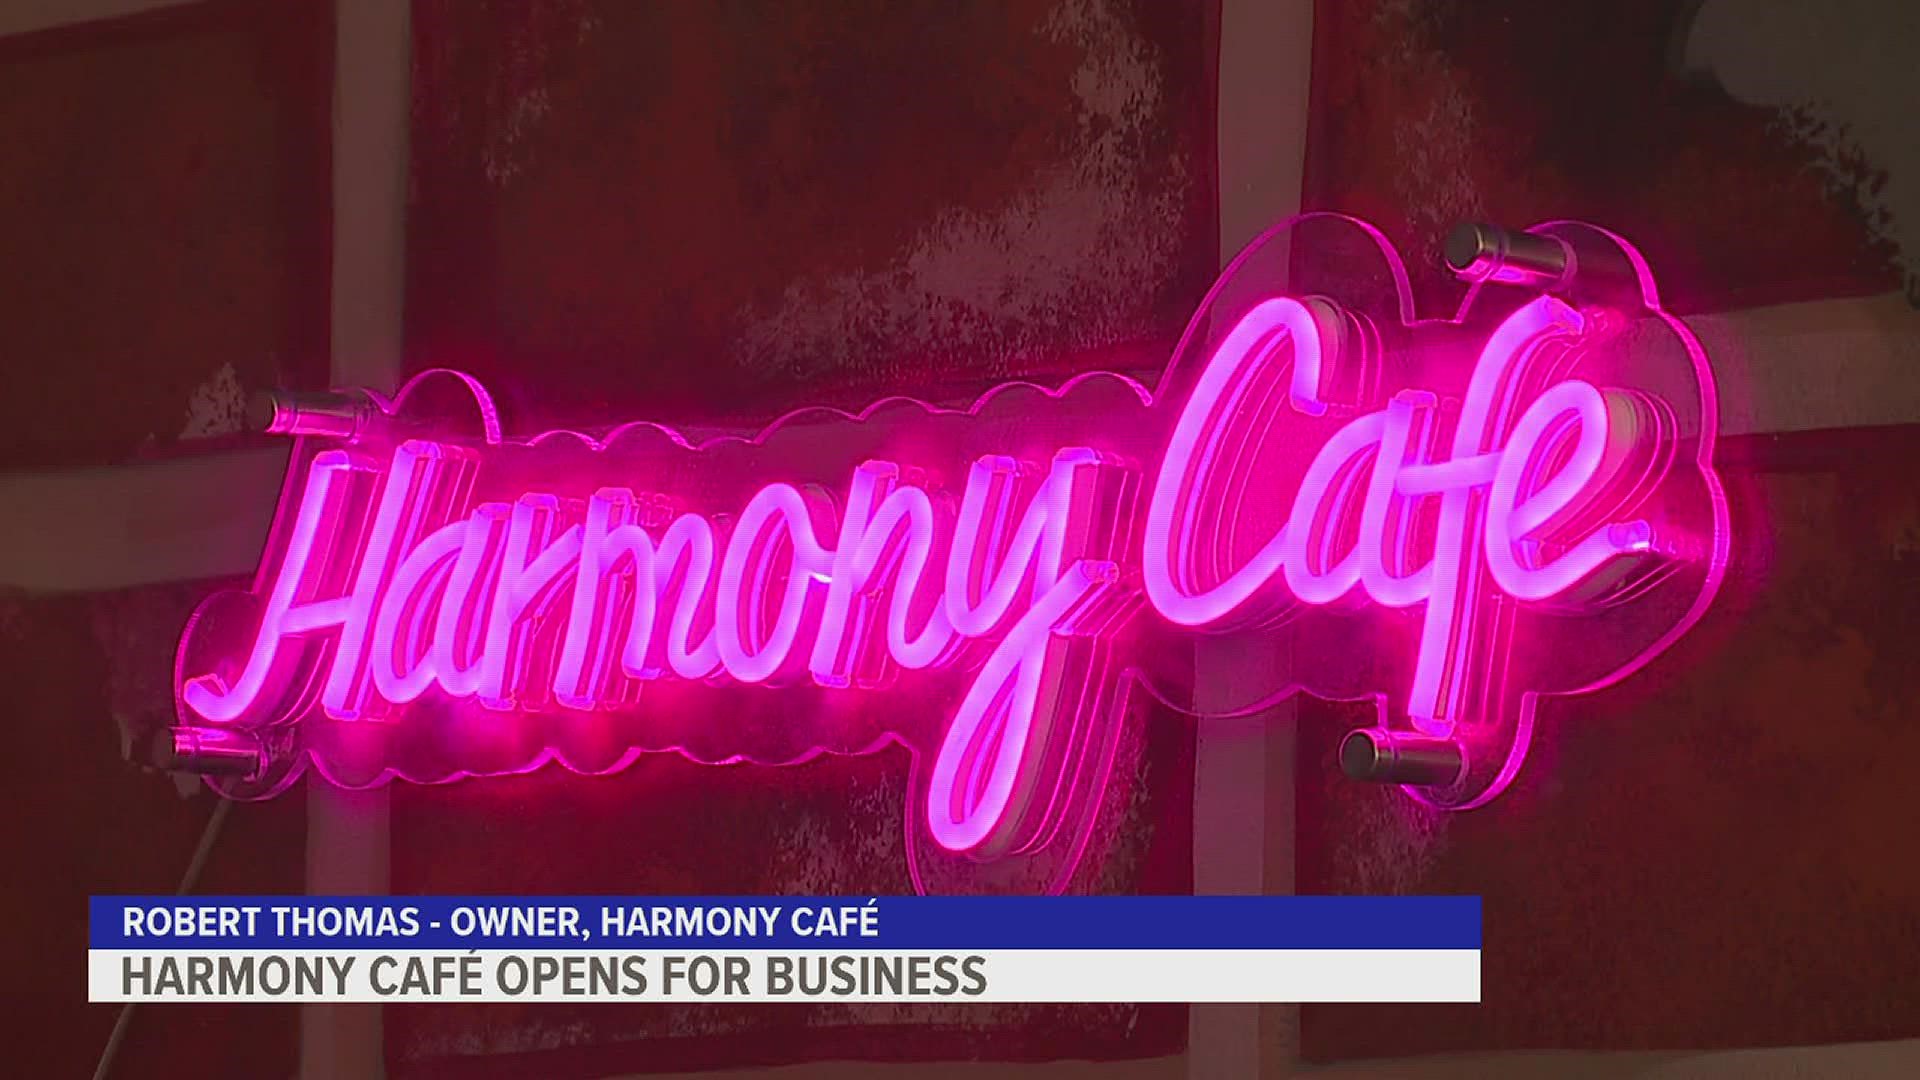 Previously known as Molly's Courtyard Café, the coffee shop is now under new ownership. Harmony Café is expected to be open for business next week